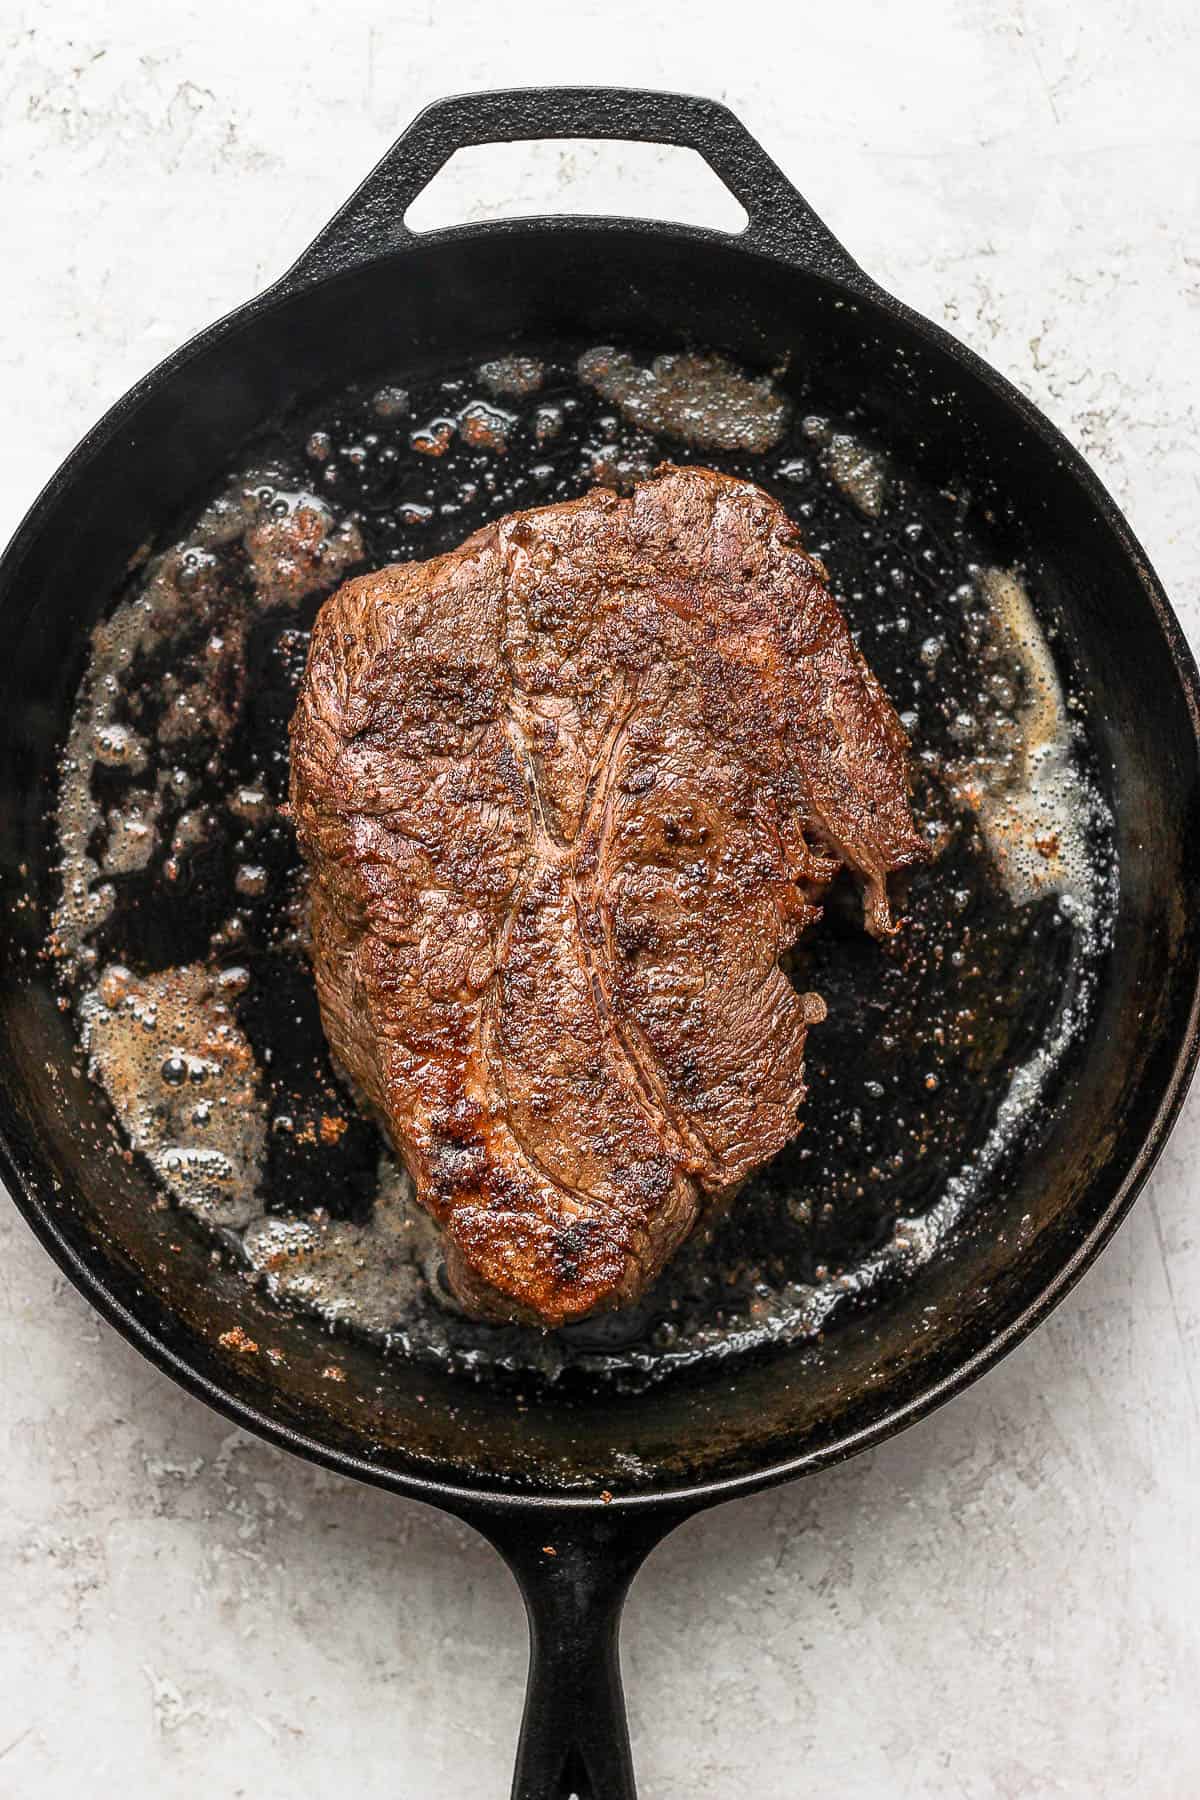 The seasoned chuck roast being seared in a large cast iron skillet.